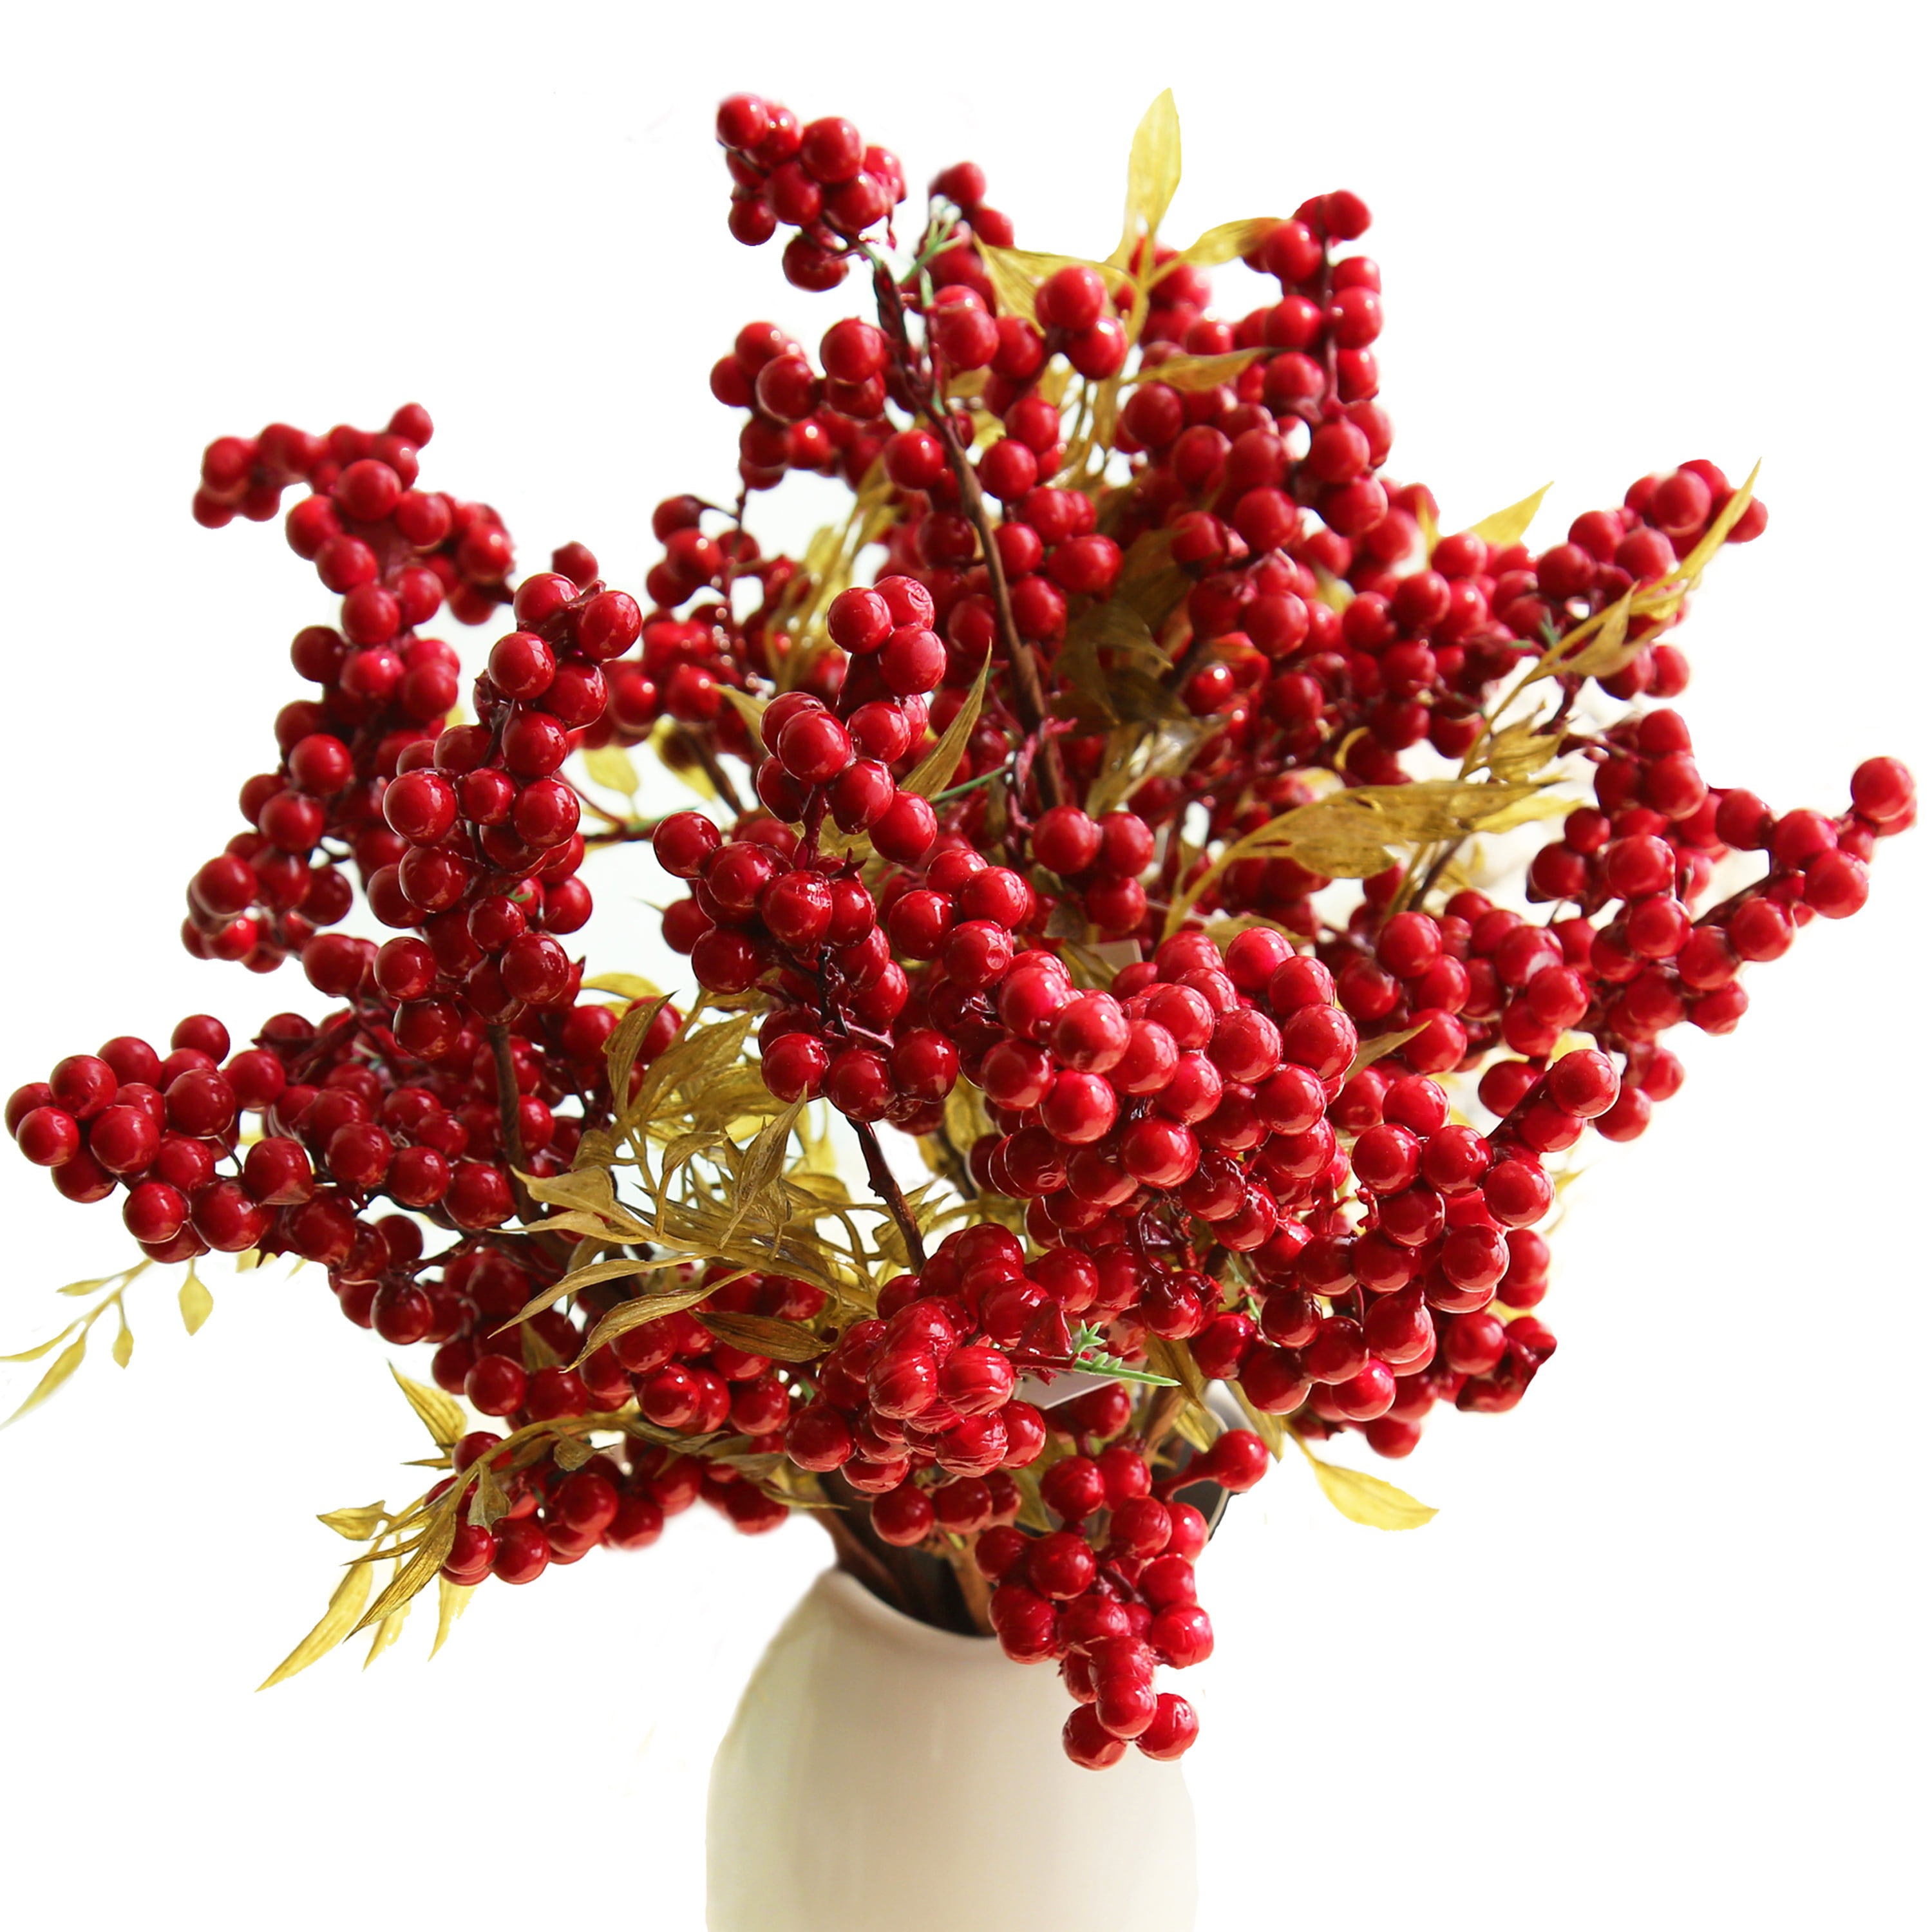 Vibrant Artificial Holly Red Berry Decorations with Flexible Stems: Set of 10 for Stunning Vases, Bouquets, and Floral Arrangements 